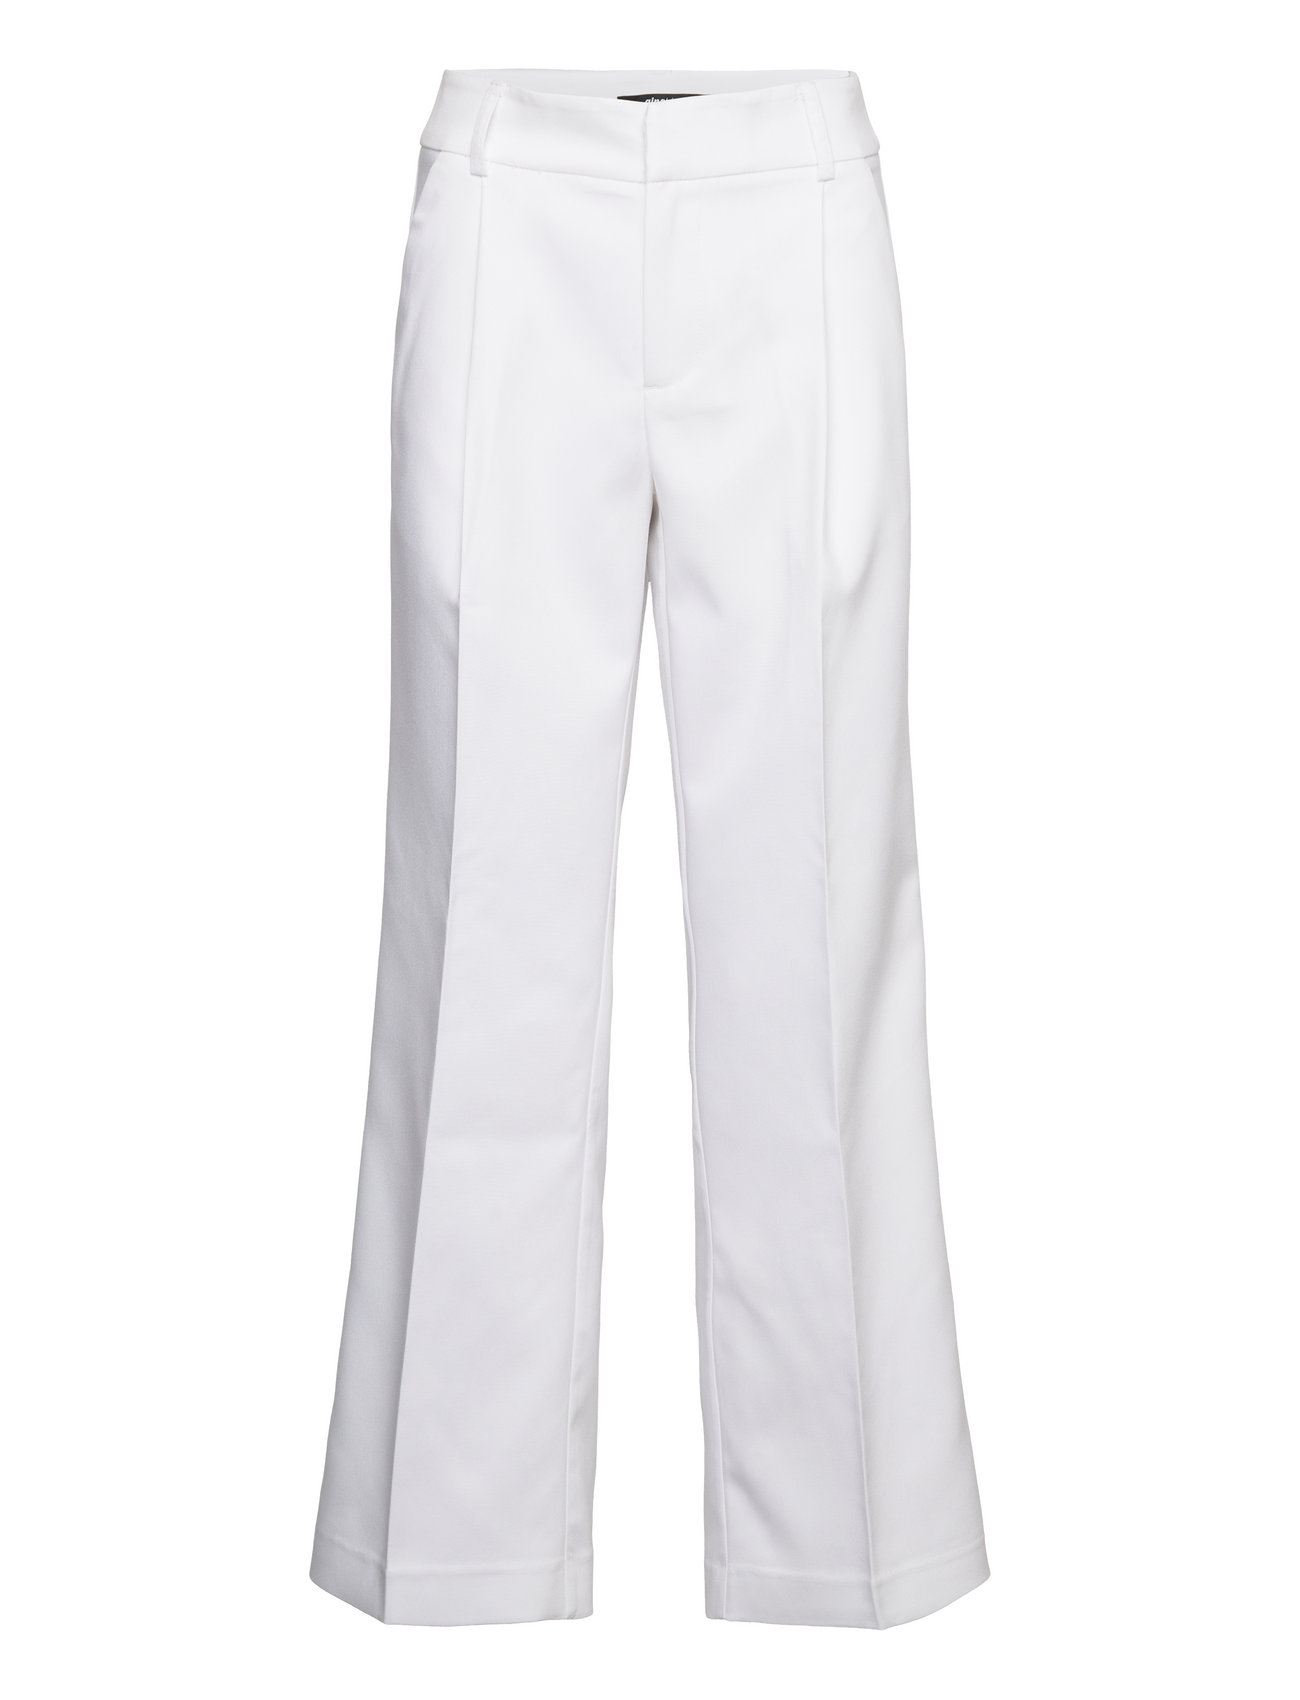 Soft touch folded flare trousers - Gina Tricot